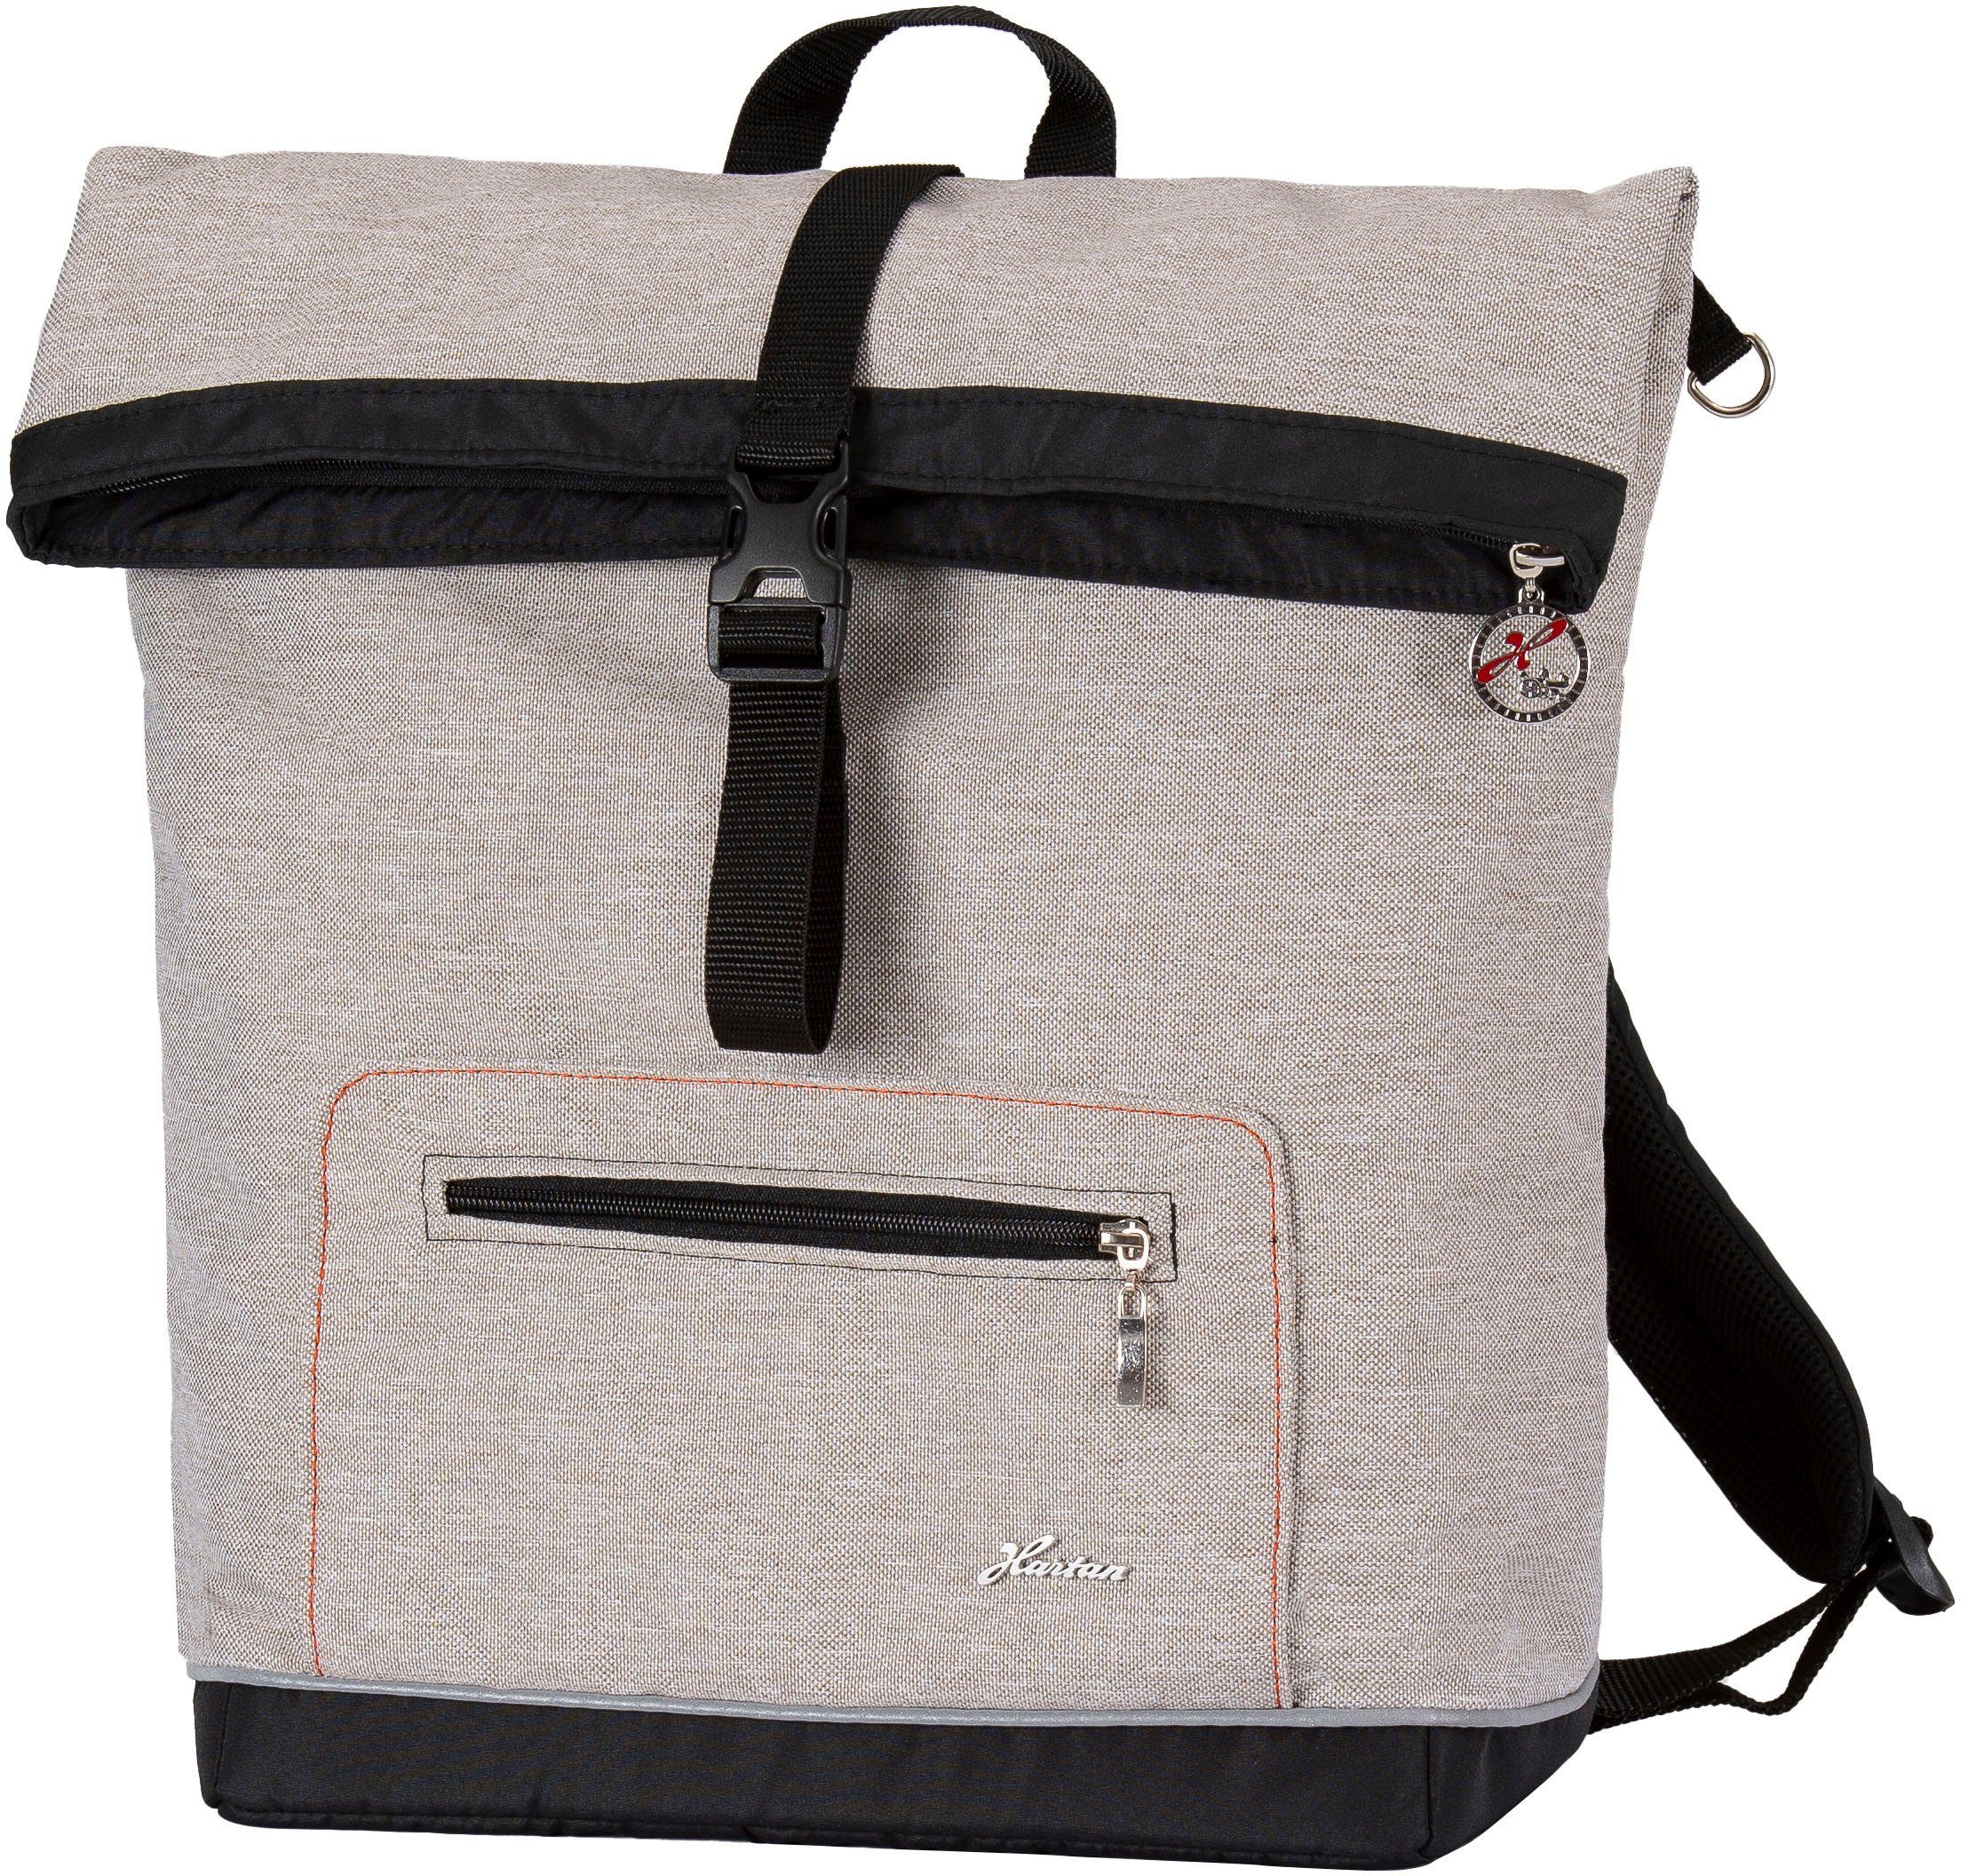 Wickelrucksack Space Casual bag love Thermofach; Made - Hartan Collection, in mit Germany hedgehog